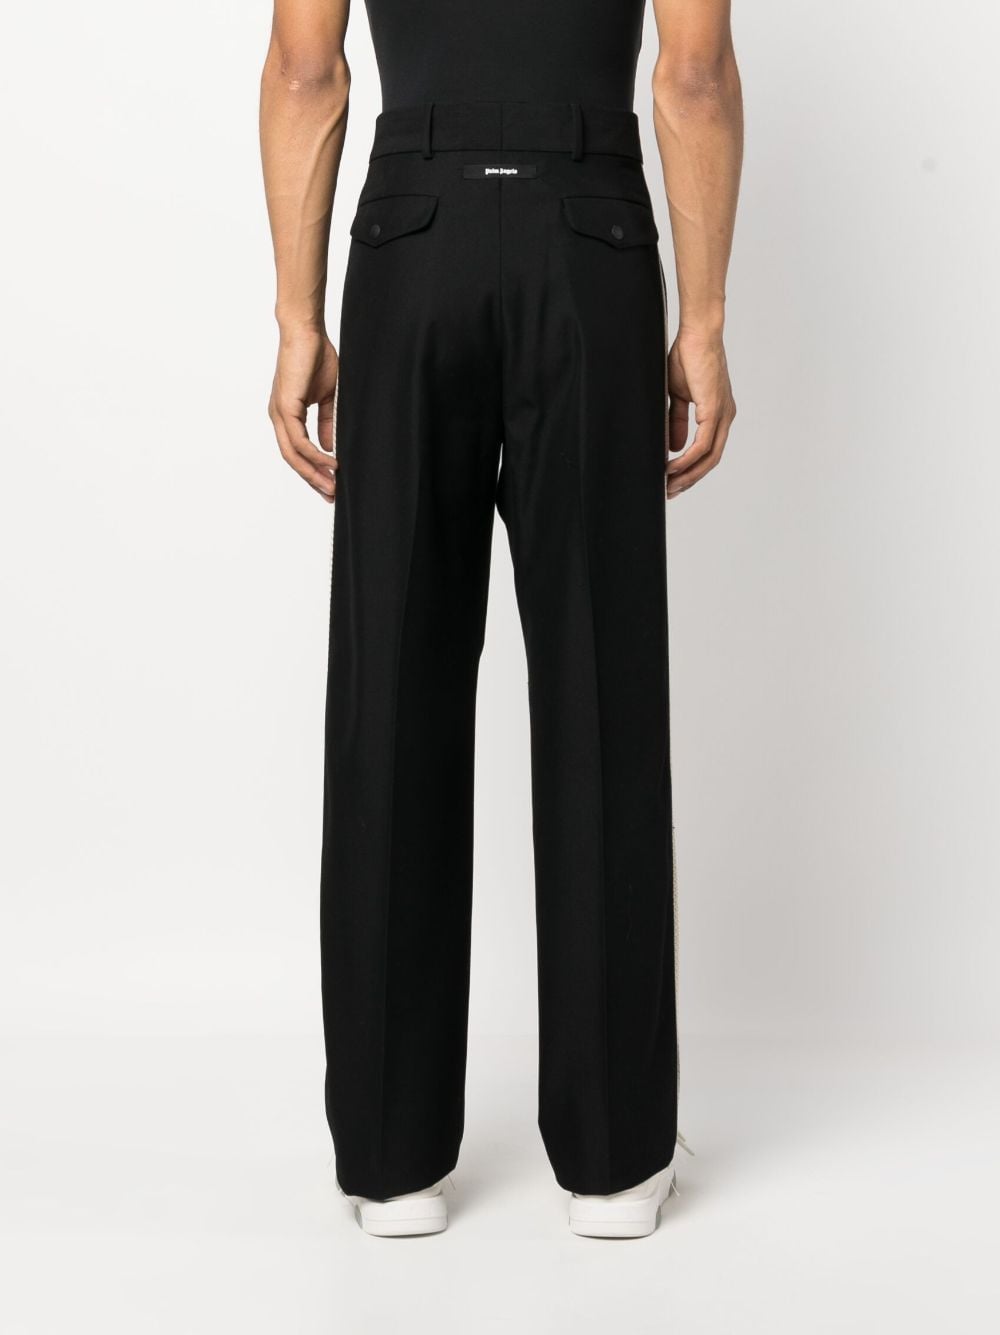 PALM ANGELS Black Cotton Tailored Trousers with Stripe Detail for Men